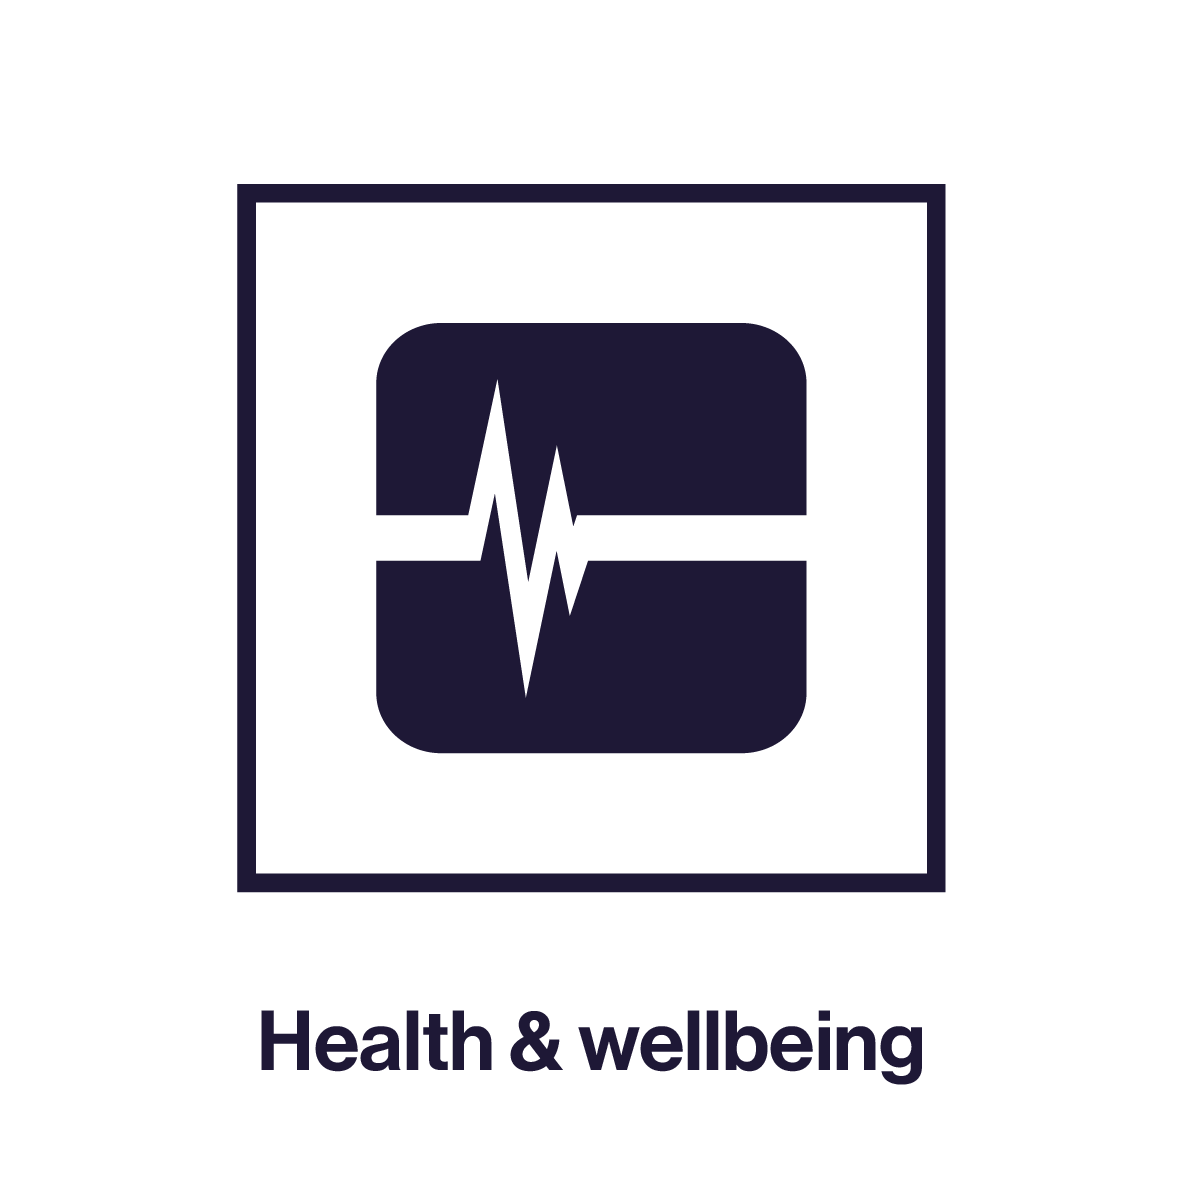 BREEAM assessment category, health & wellbeing icon